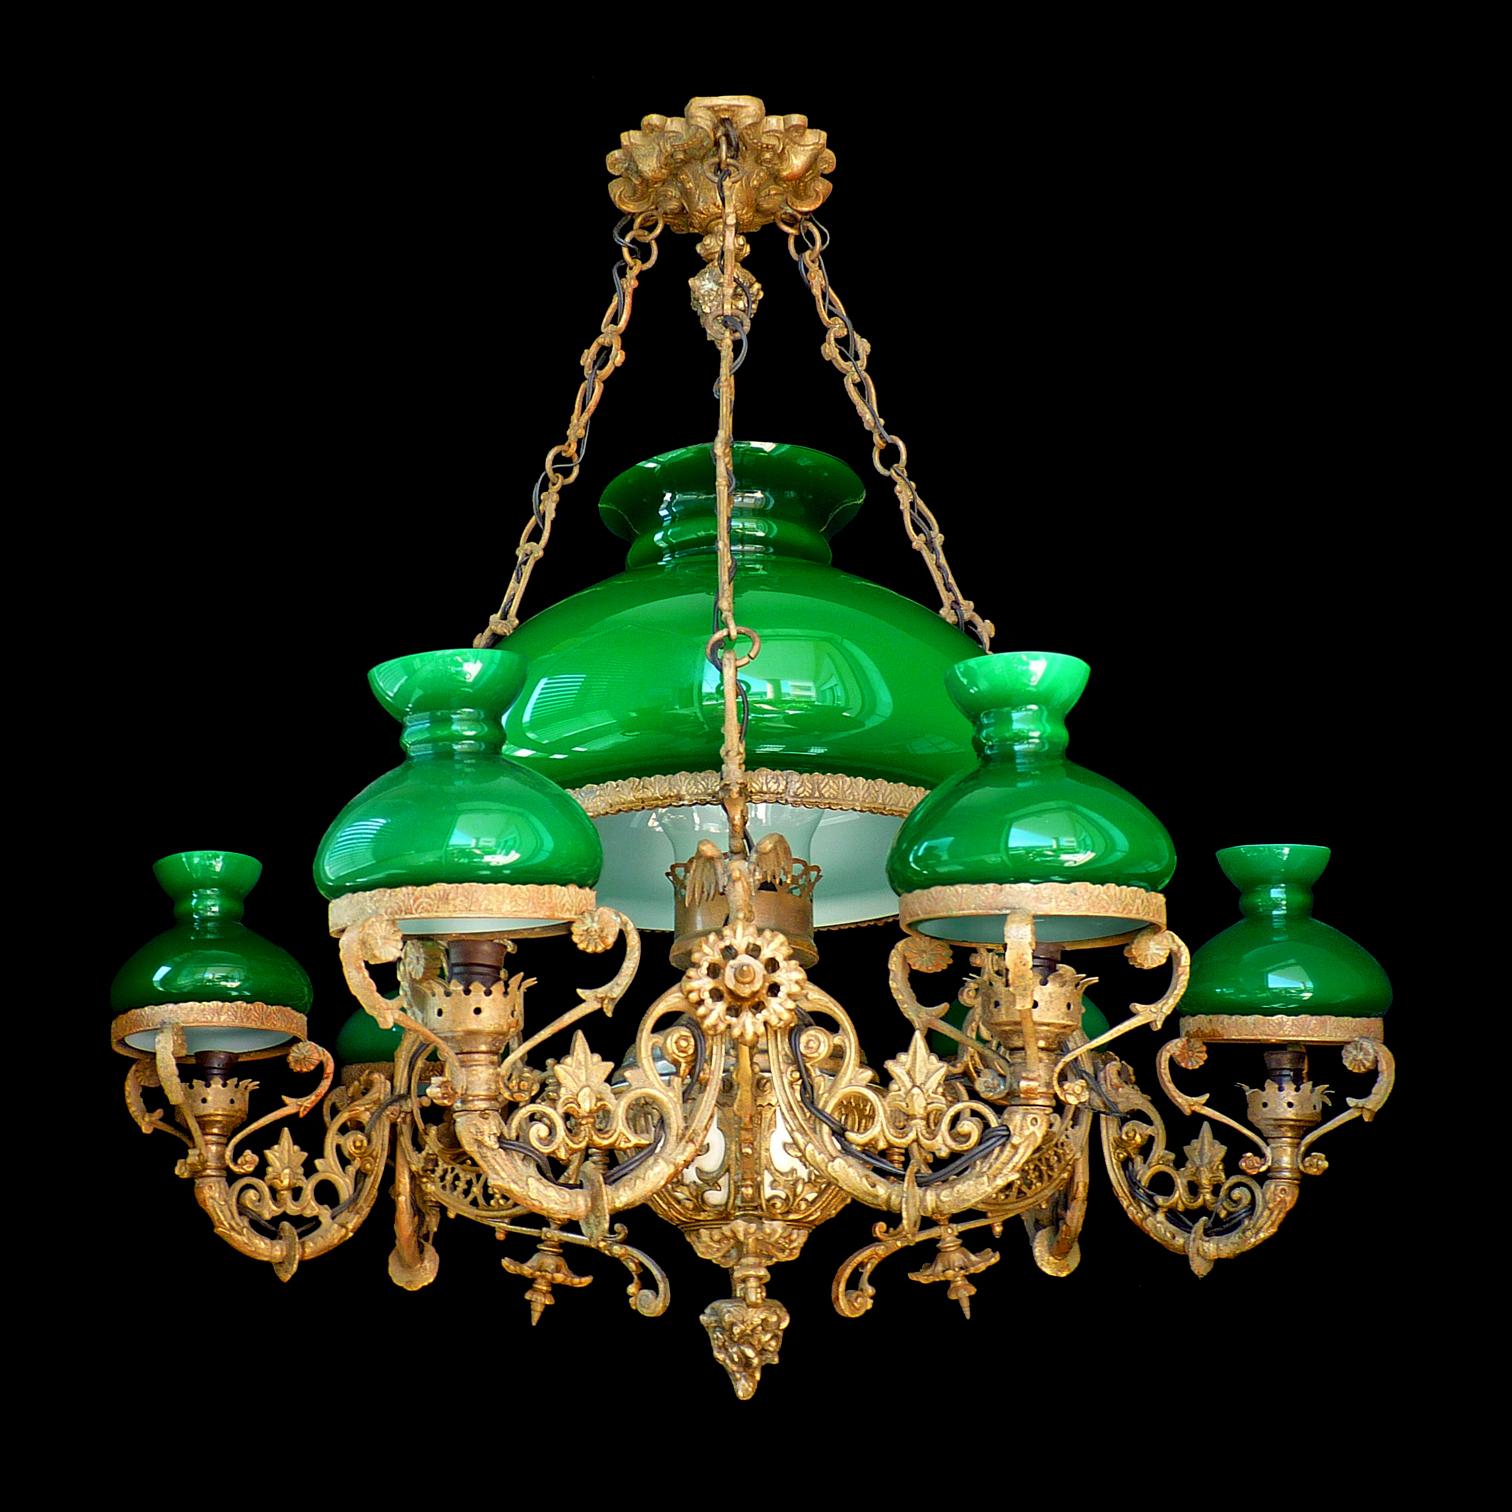 Gorgeous monumental antique circa 1940 French Victorian 7-light bulbs chandelier with Opaline green cased glass and chiselled gilt bronze/ brass.
Measures:
Diameter 36 in / 90 cm
Height 40 in / 100 cm
Diameter glass shades 14 in (36 cm)/ 9 in (23